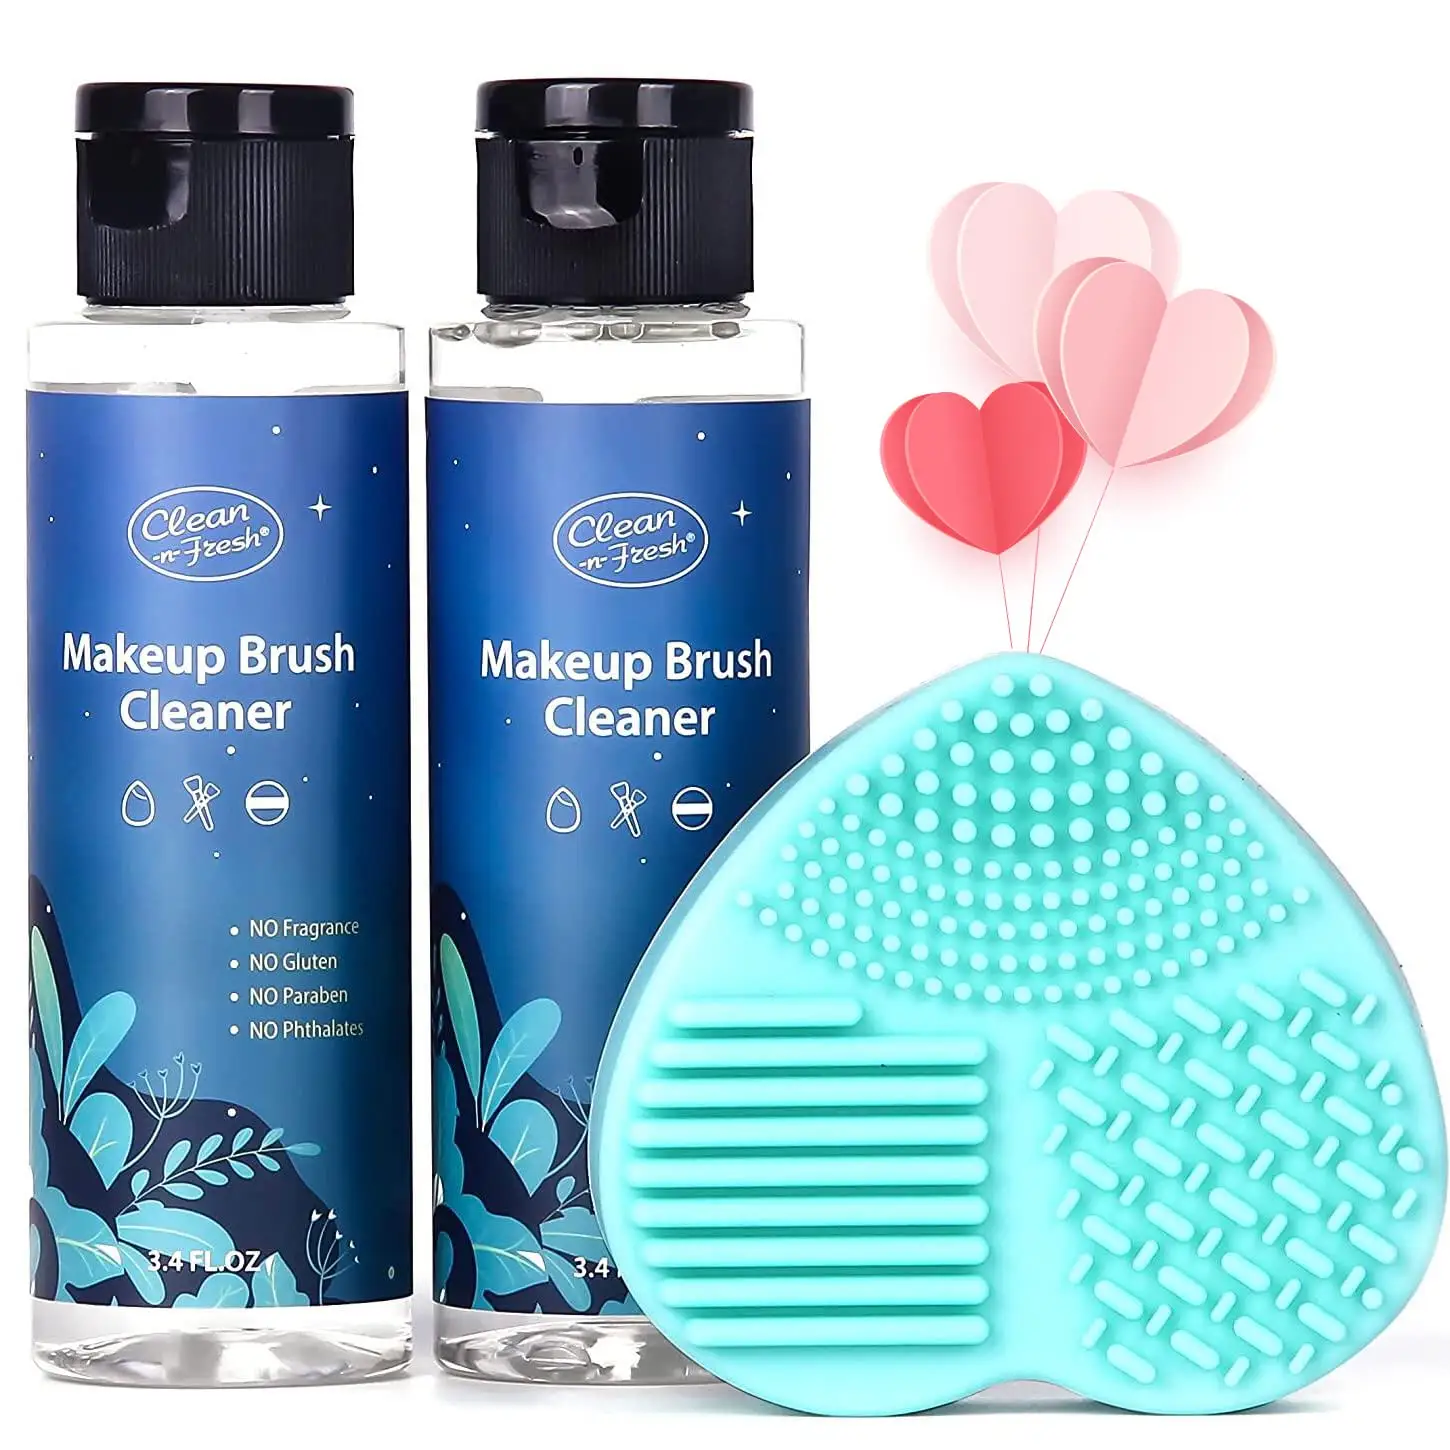 Make Up Brush Cleaning Silicone Mat Make Up Brush Cleaning Gel Makeup Tools Cleaner